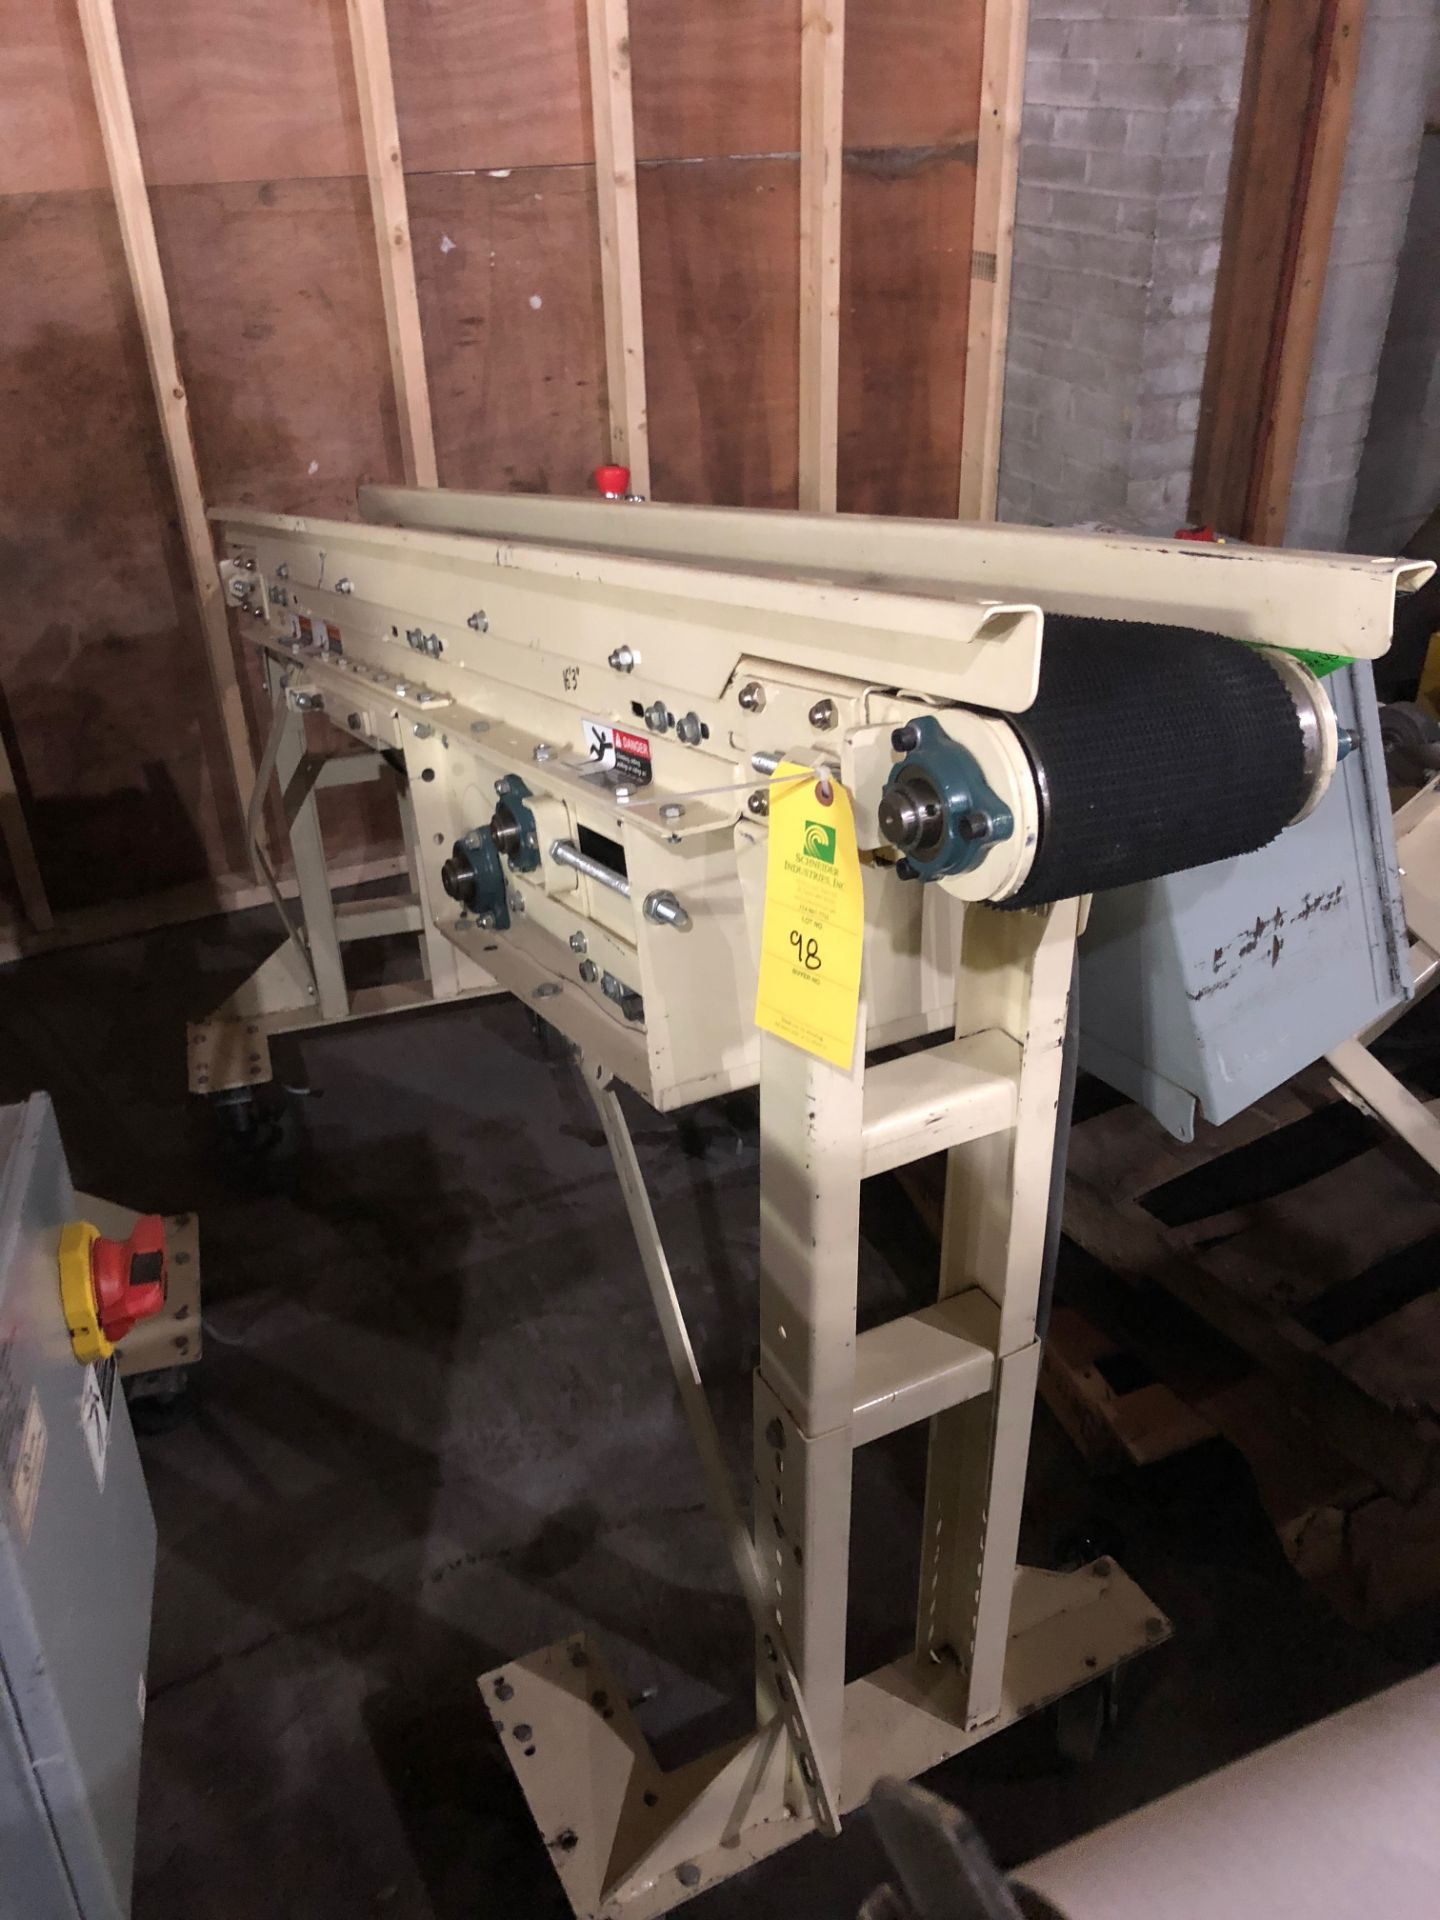 Belt Conveyor 6 in. x 7 ft. Rigging Fee for the item: $30